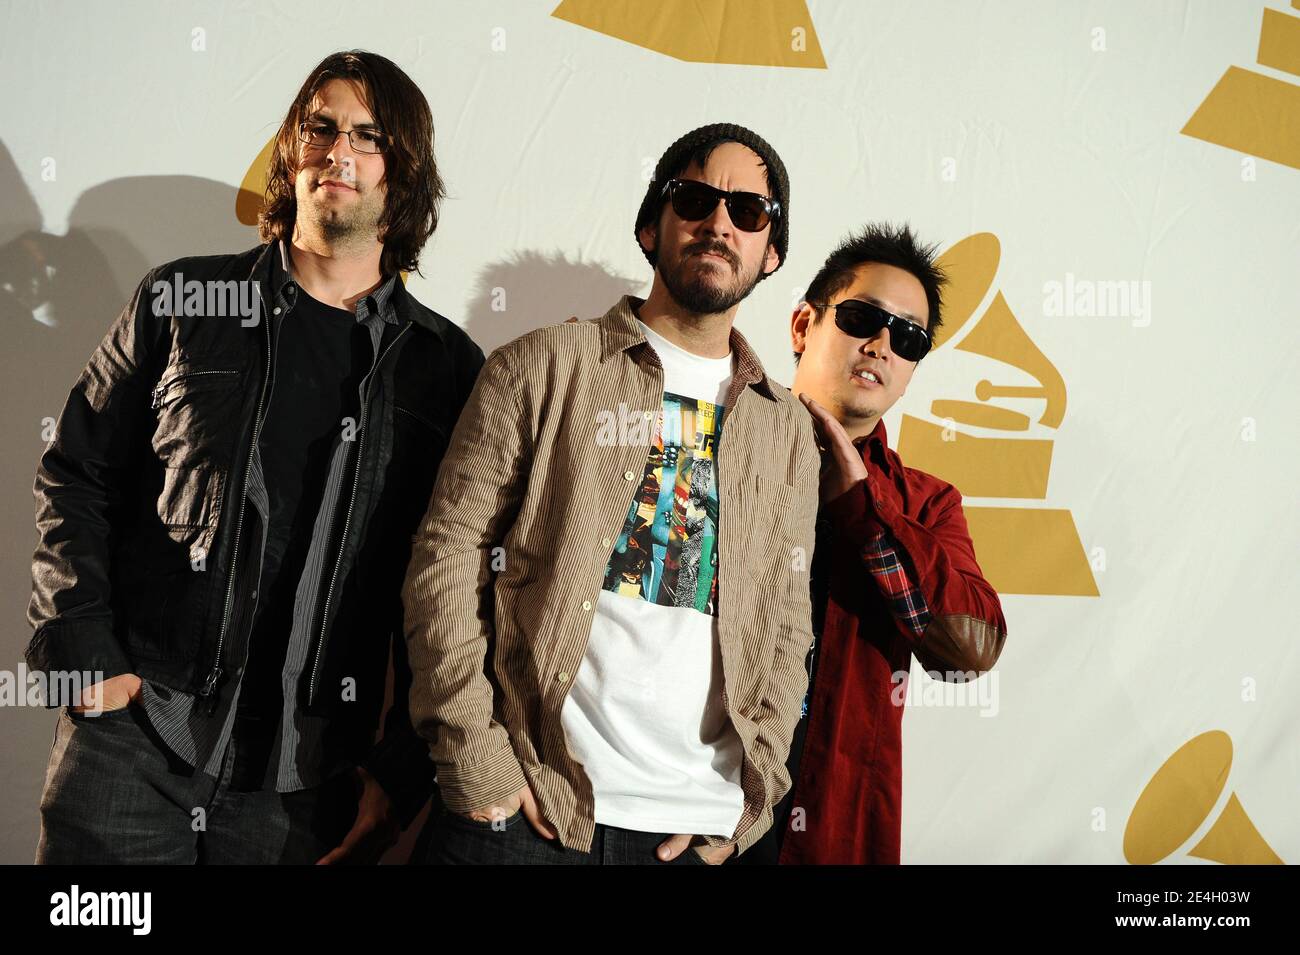 Rob Bourdon, Mike Shinoda and Joe Hahn attend the GRAMMY Nominations Concert Live held at the Nokia Club, downtown Los Angeles, California on December 2, 2009. Photo by Lionel Hahn/ABACAPRESS.COM (Pictured: Rob Bourdon , Mike Shinoda, Joe Hahn, linkin park) Stock Photo